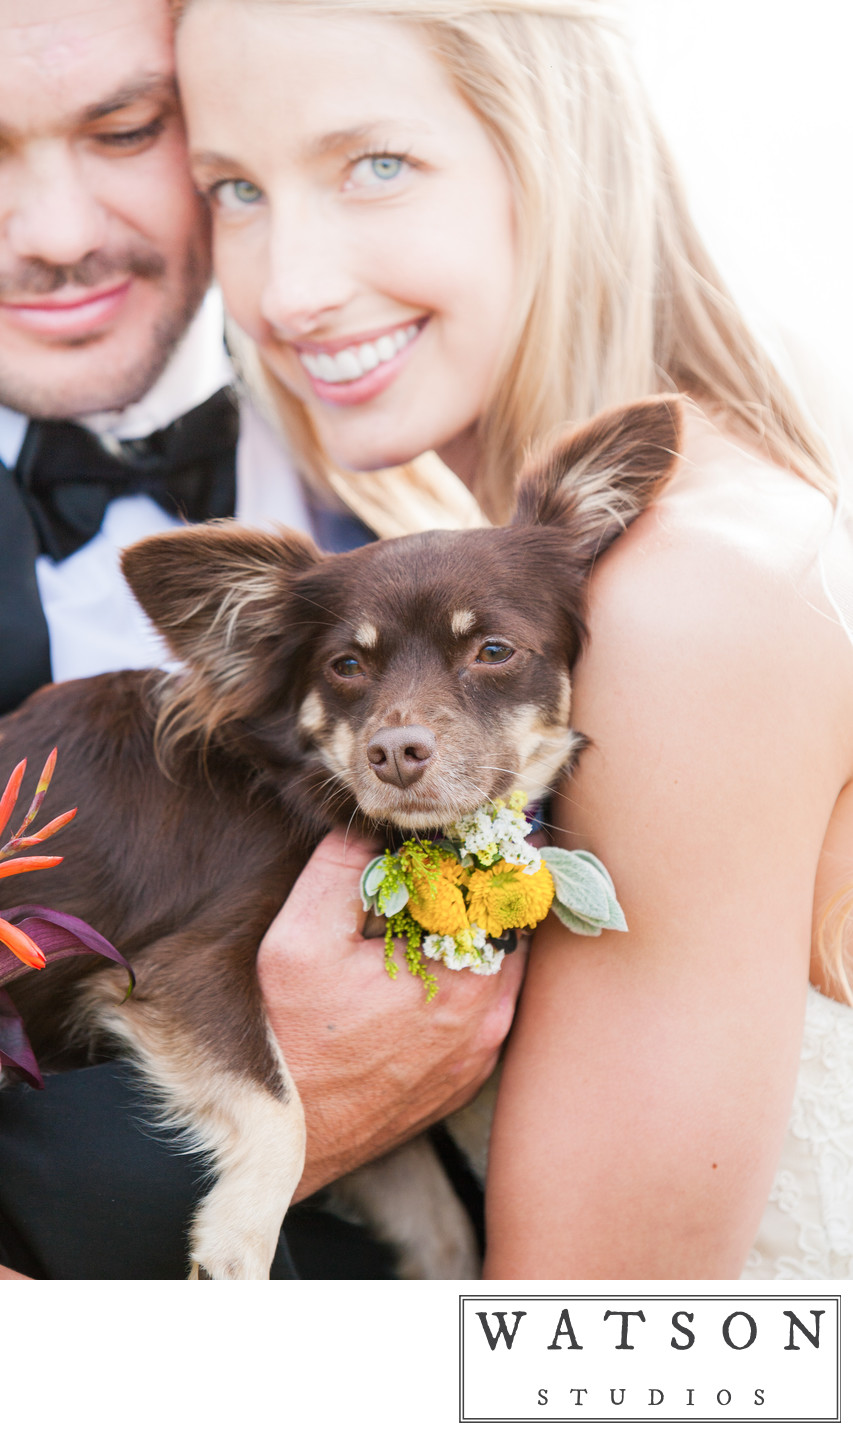 Bride and Groom with Dog at Wedding